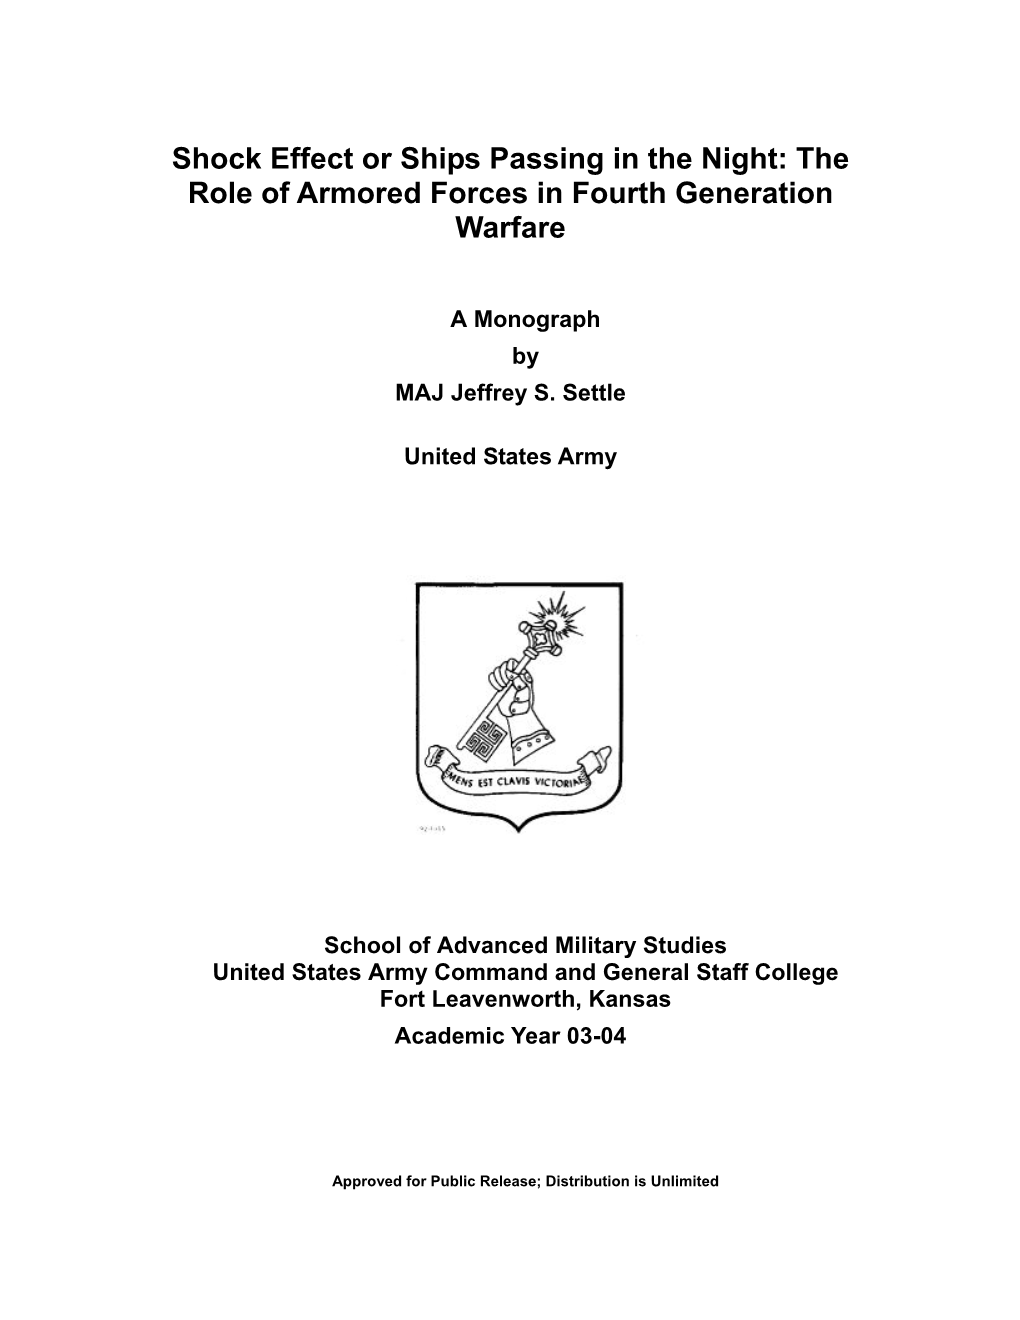 The Role of Armor in Fourth Generation Warfare